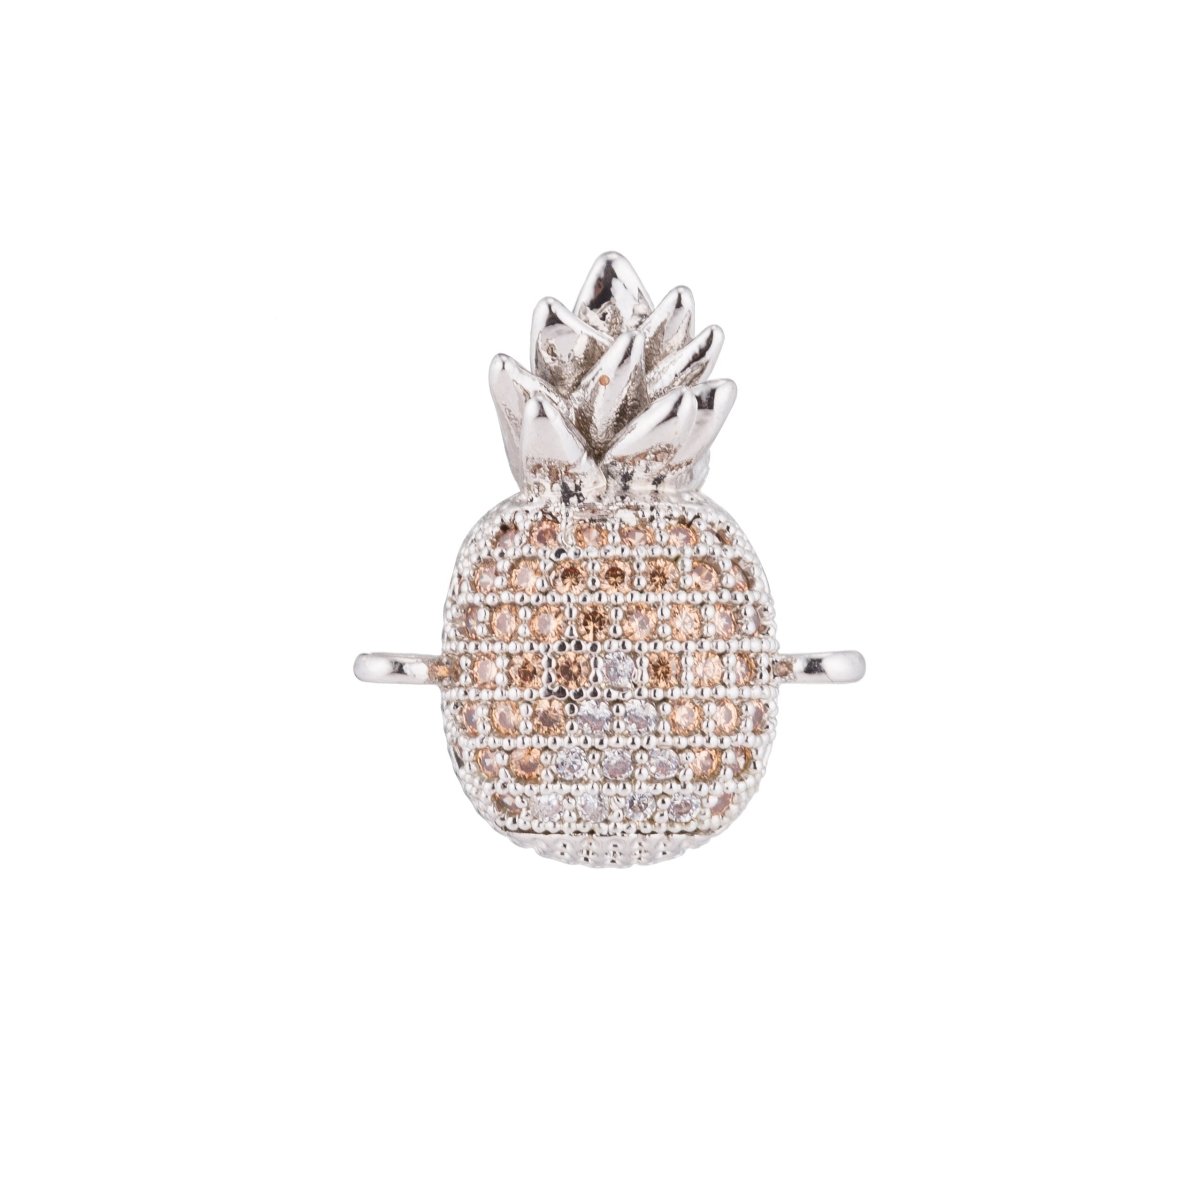 Gold Filled Silver Cute Pineapple, Fruit, Healthy, Food DIY Gift Cubic Zirconia Bracelet Charm Bead Finding Connector for Jewelry Making F-124 - DLUXCA